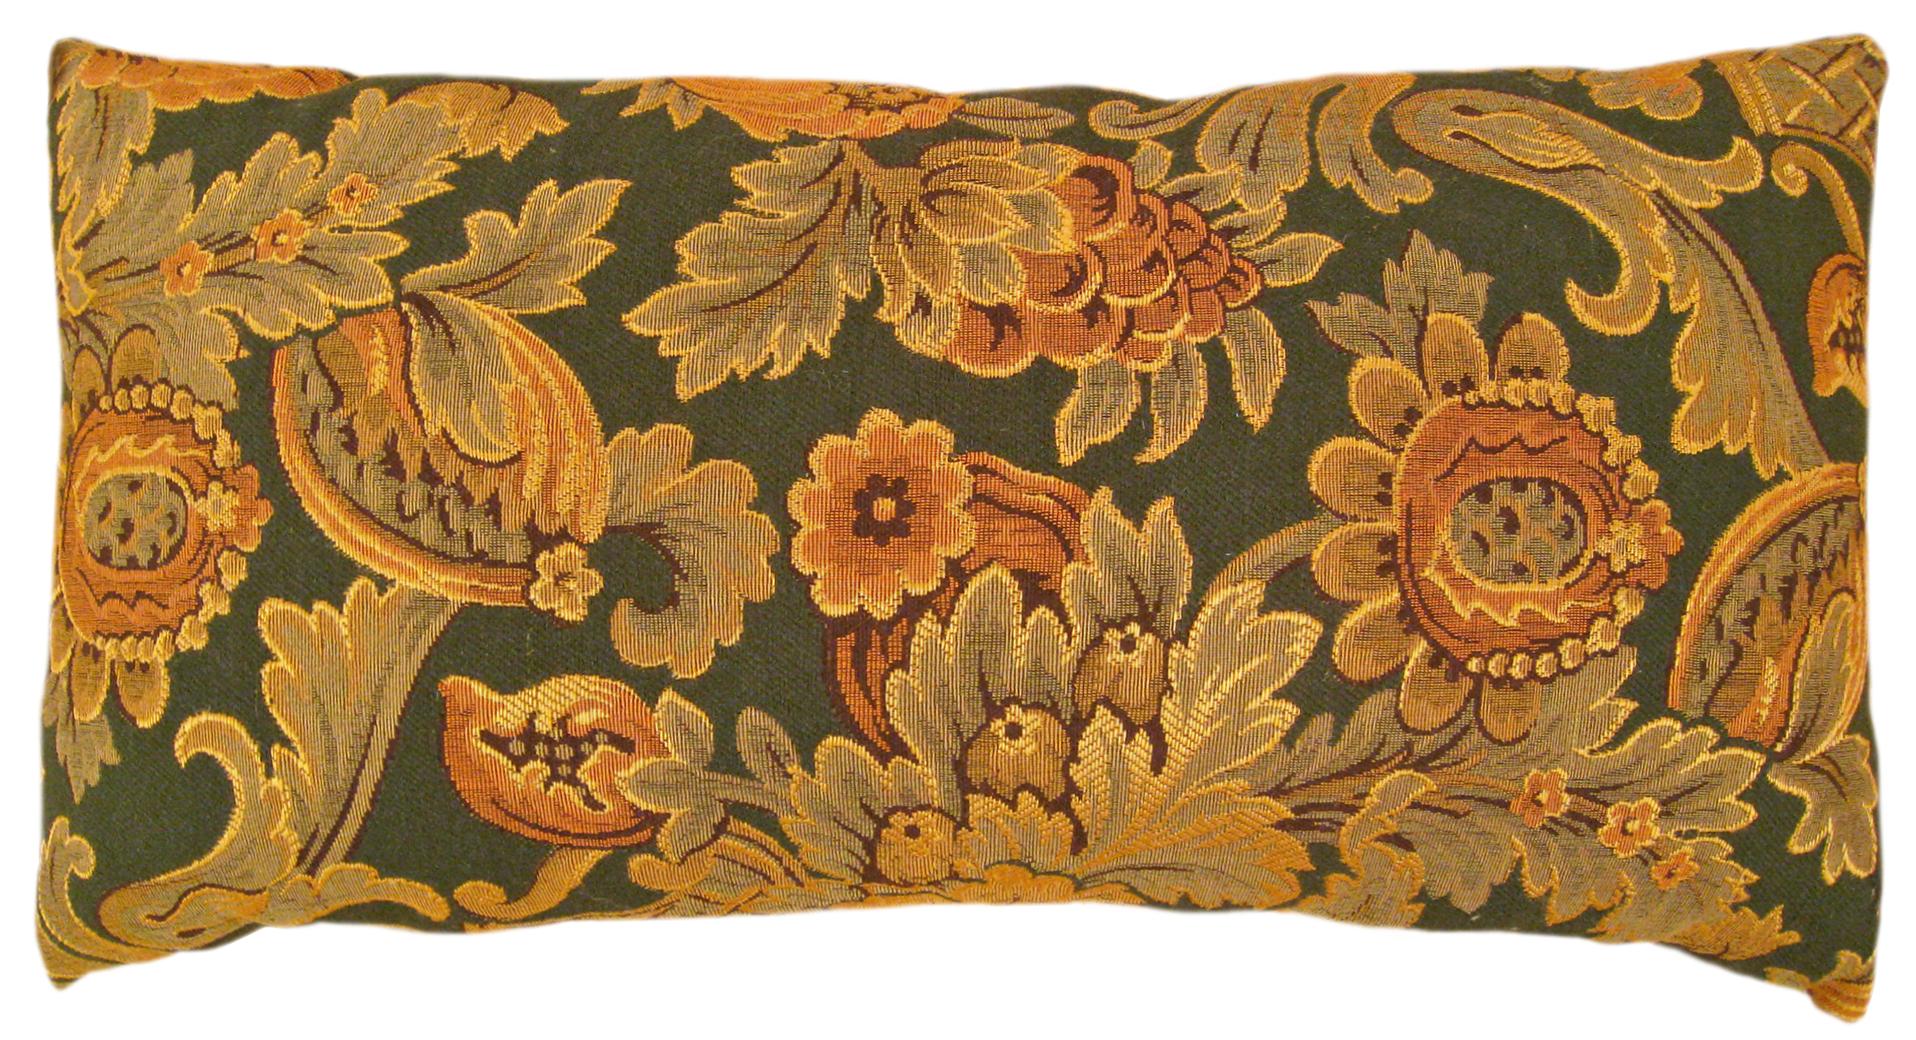 Pair of Decorative Antique Jacquard Tapestry Pillows with Floral Elements  For Sale 2